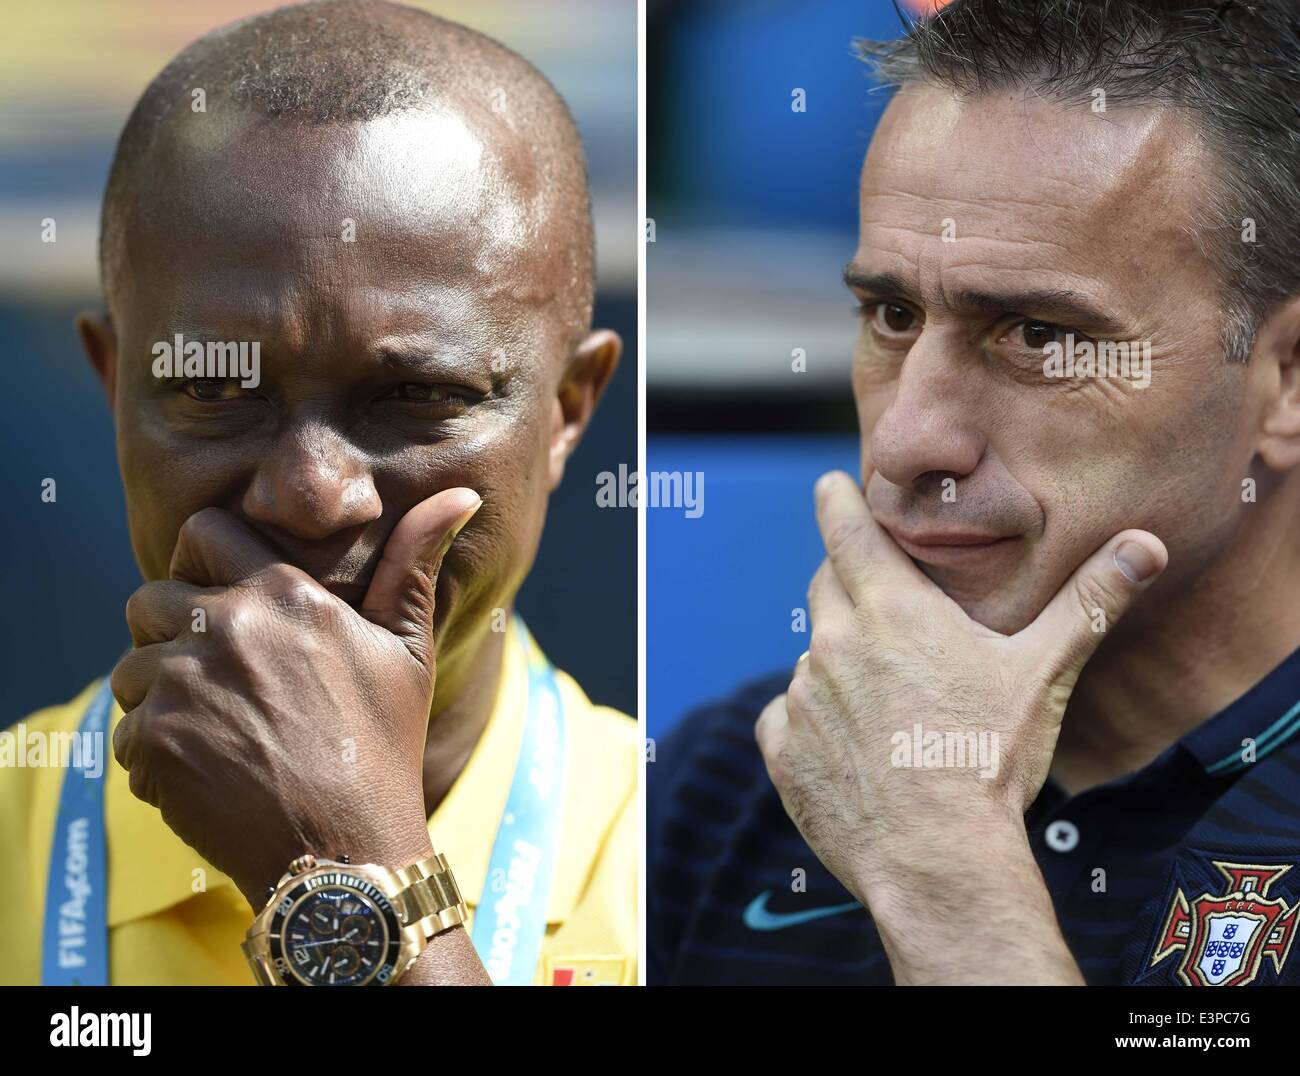 Brasilia, Brazil. 26th June, 2014. The combined photo taken on June 6, 2014 shows Portugal's head coach Paulo Bento (R) and Ghana's head coach Kwesi Appiah looking on during a Group G match between Portugal and Ghana of 2014 FIFA World Cup at the Estadio Nacional Stadium in Brasilia, Brazil, June 26, 2014. Credit:  Qi Heng/Xinhua/Alamy Live News Stock Photo